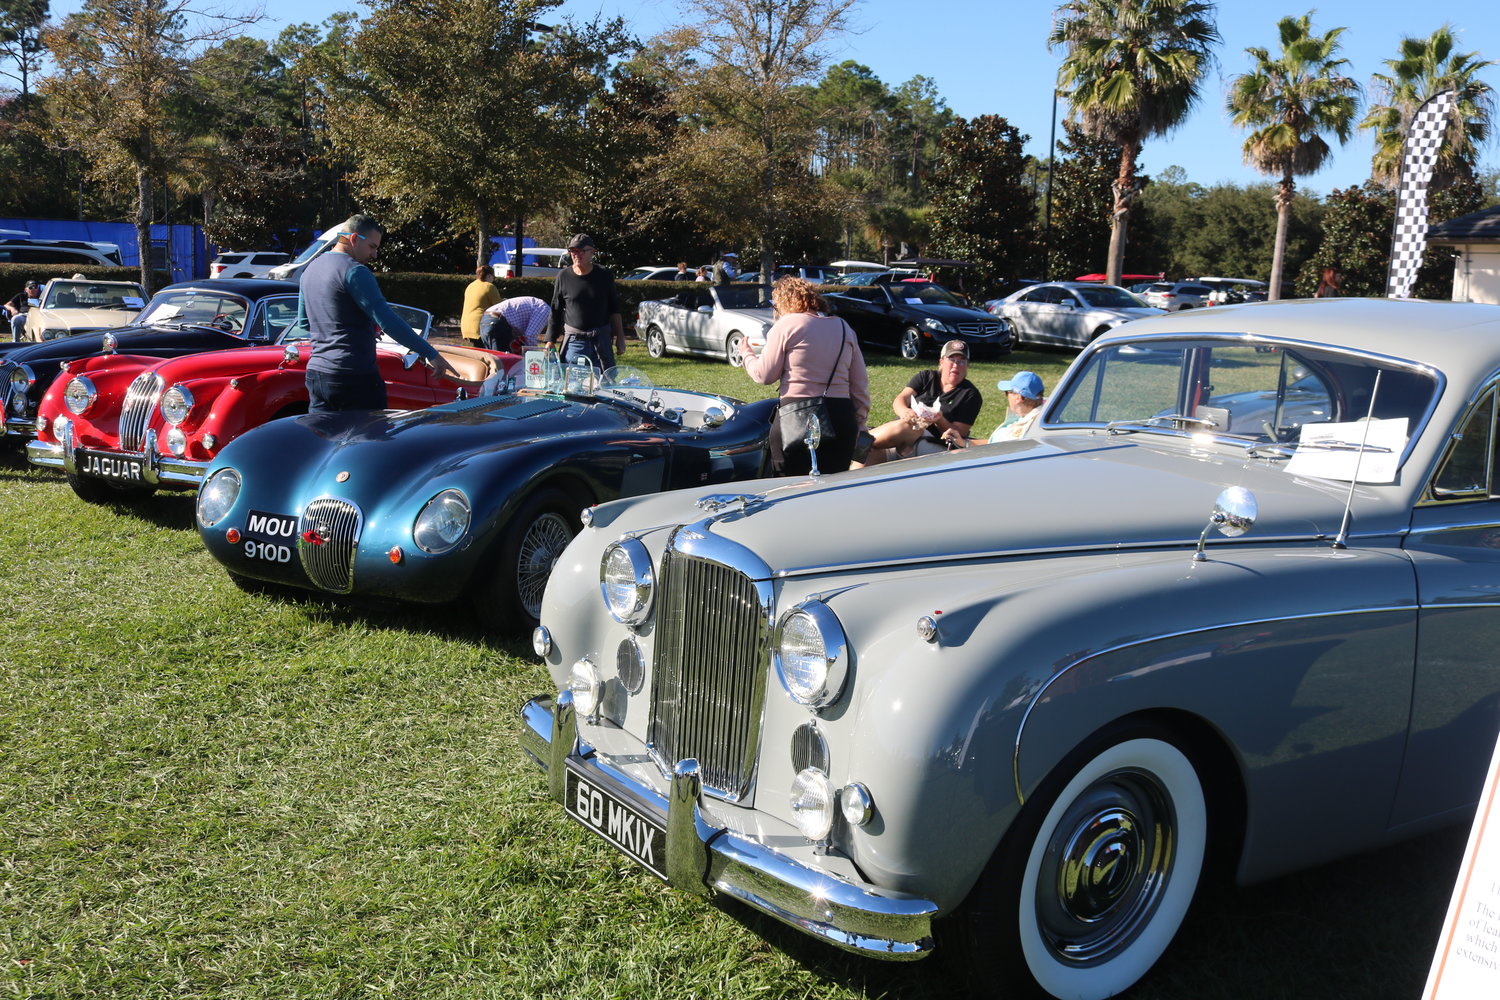 Jaguars were featured at this year’s event.